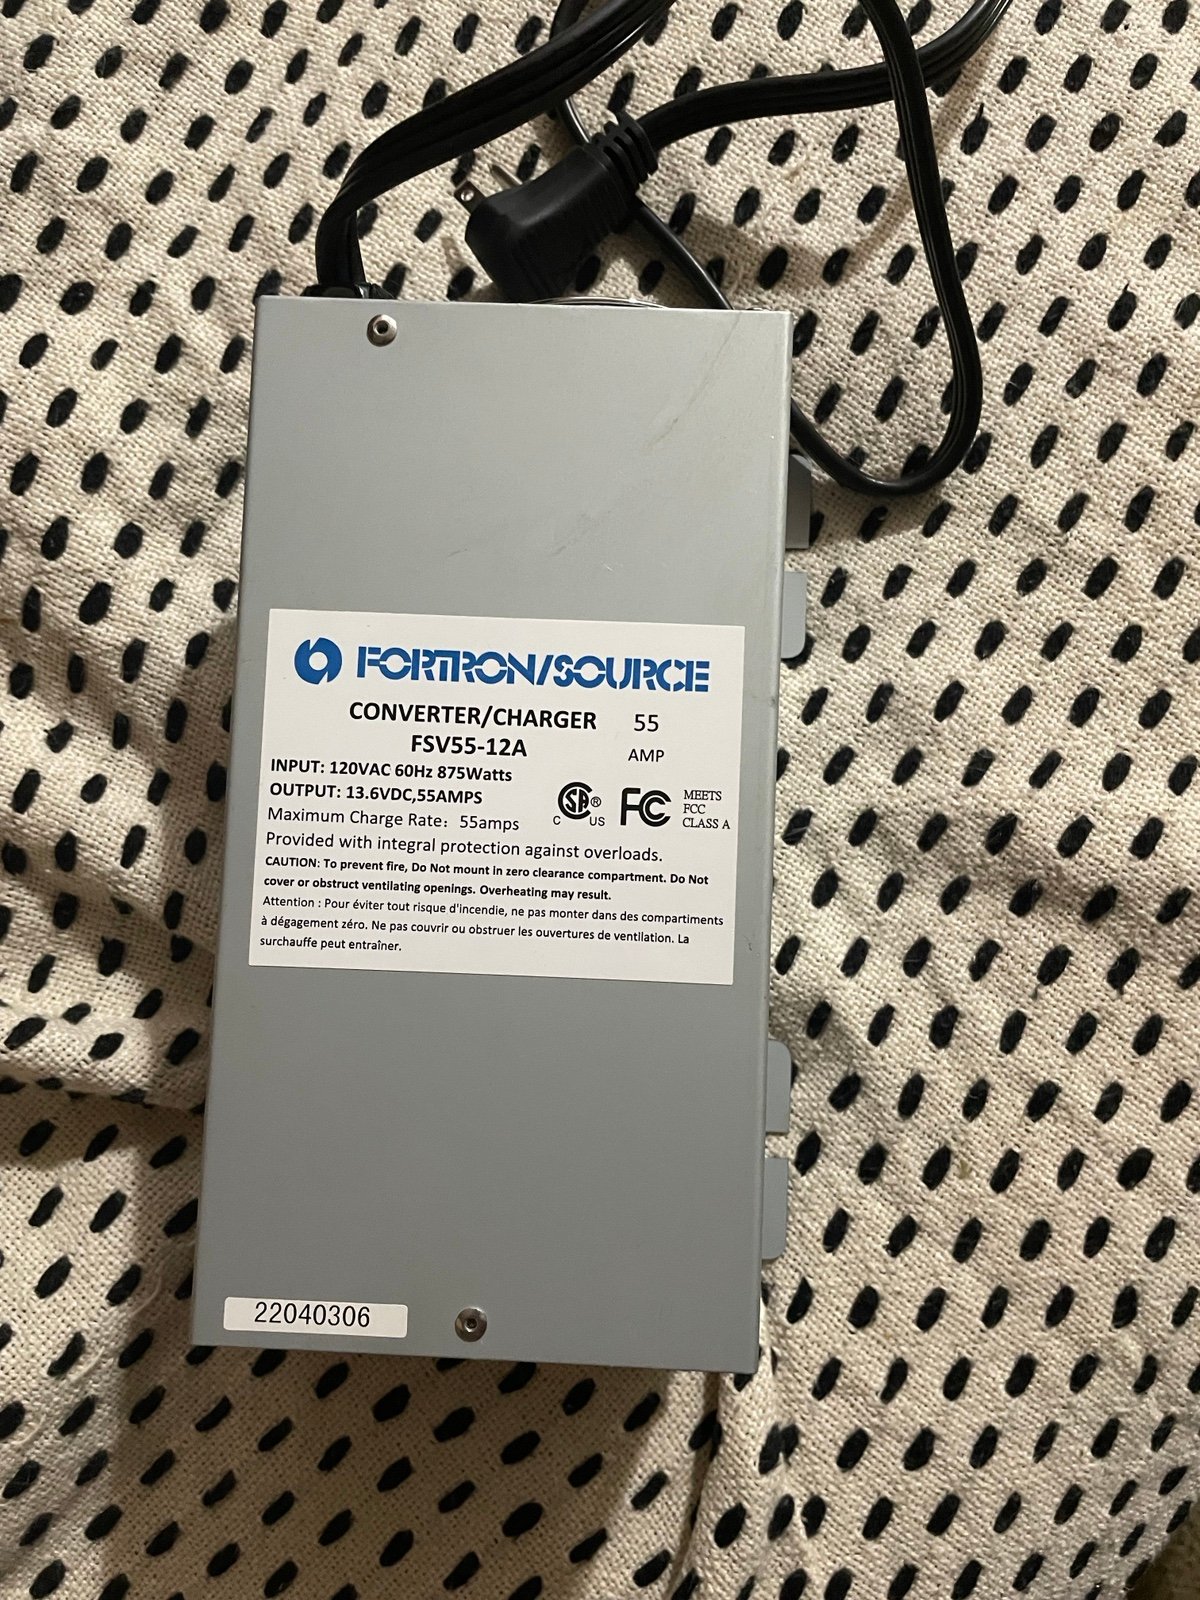 Power Supply 55Amp Recreational Vehicle Fortron/Source SRV Series Charger Con jo2pvt0If